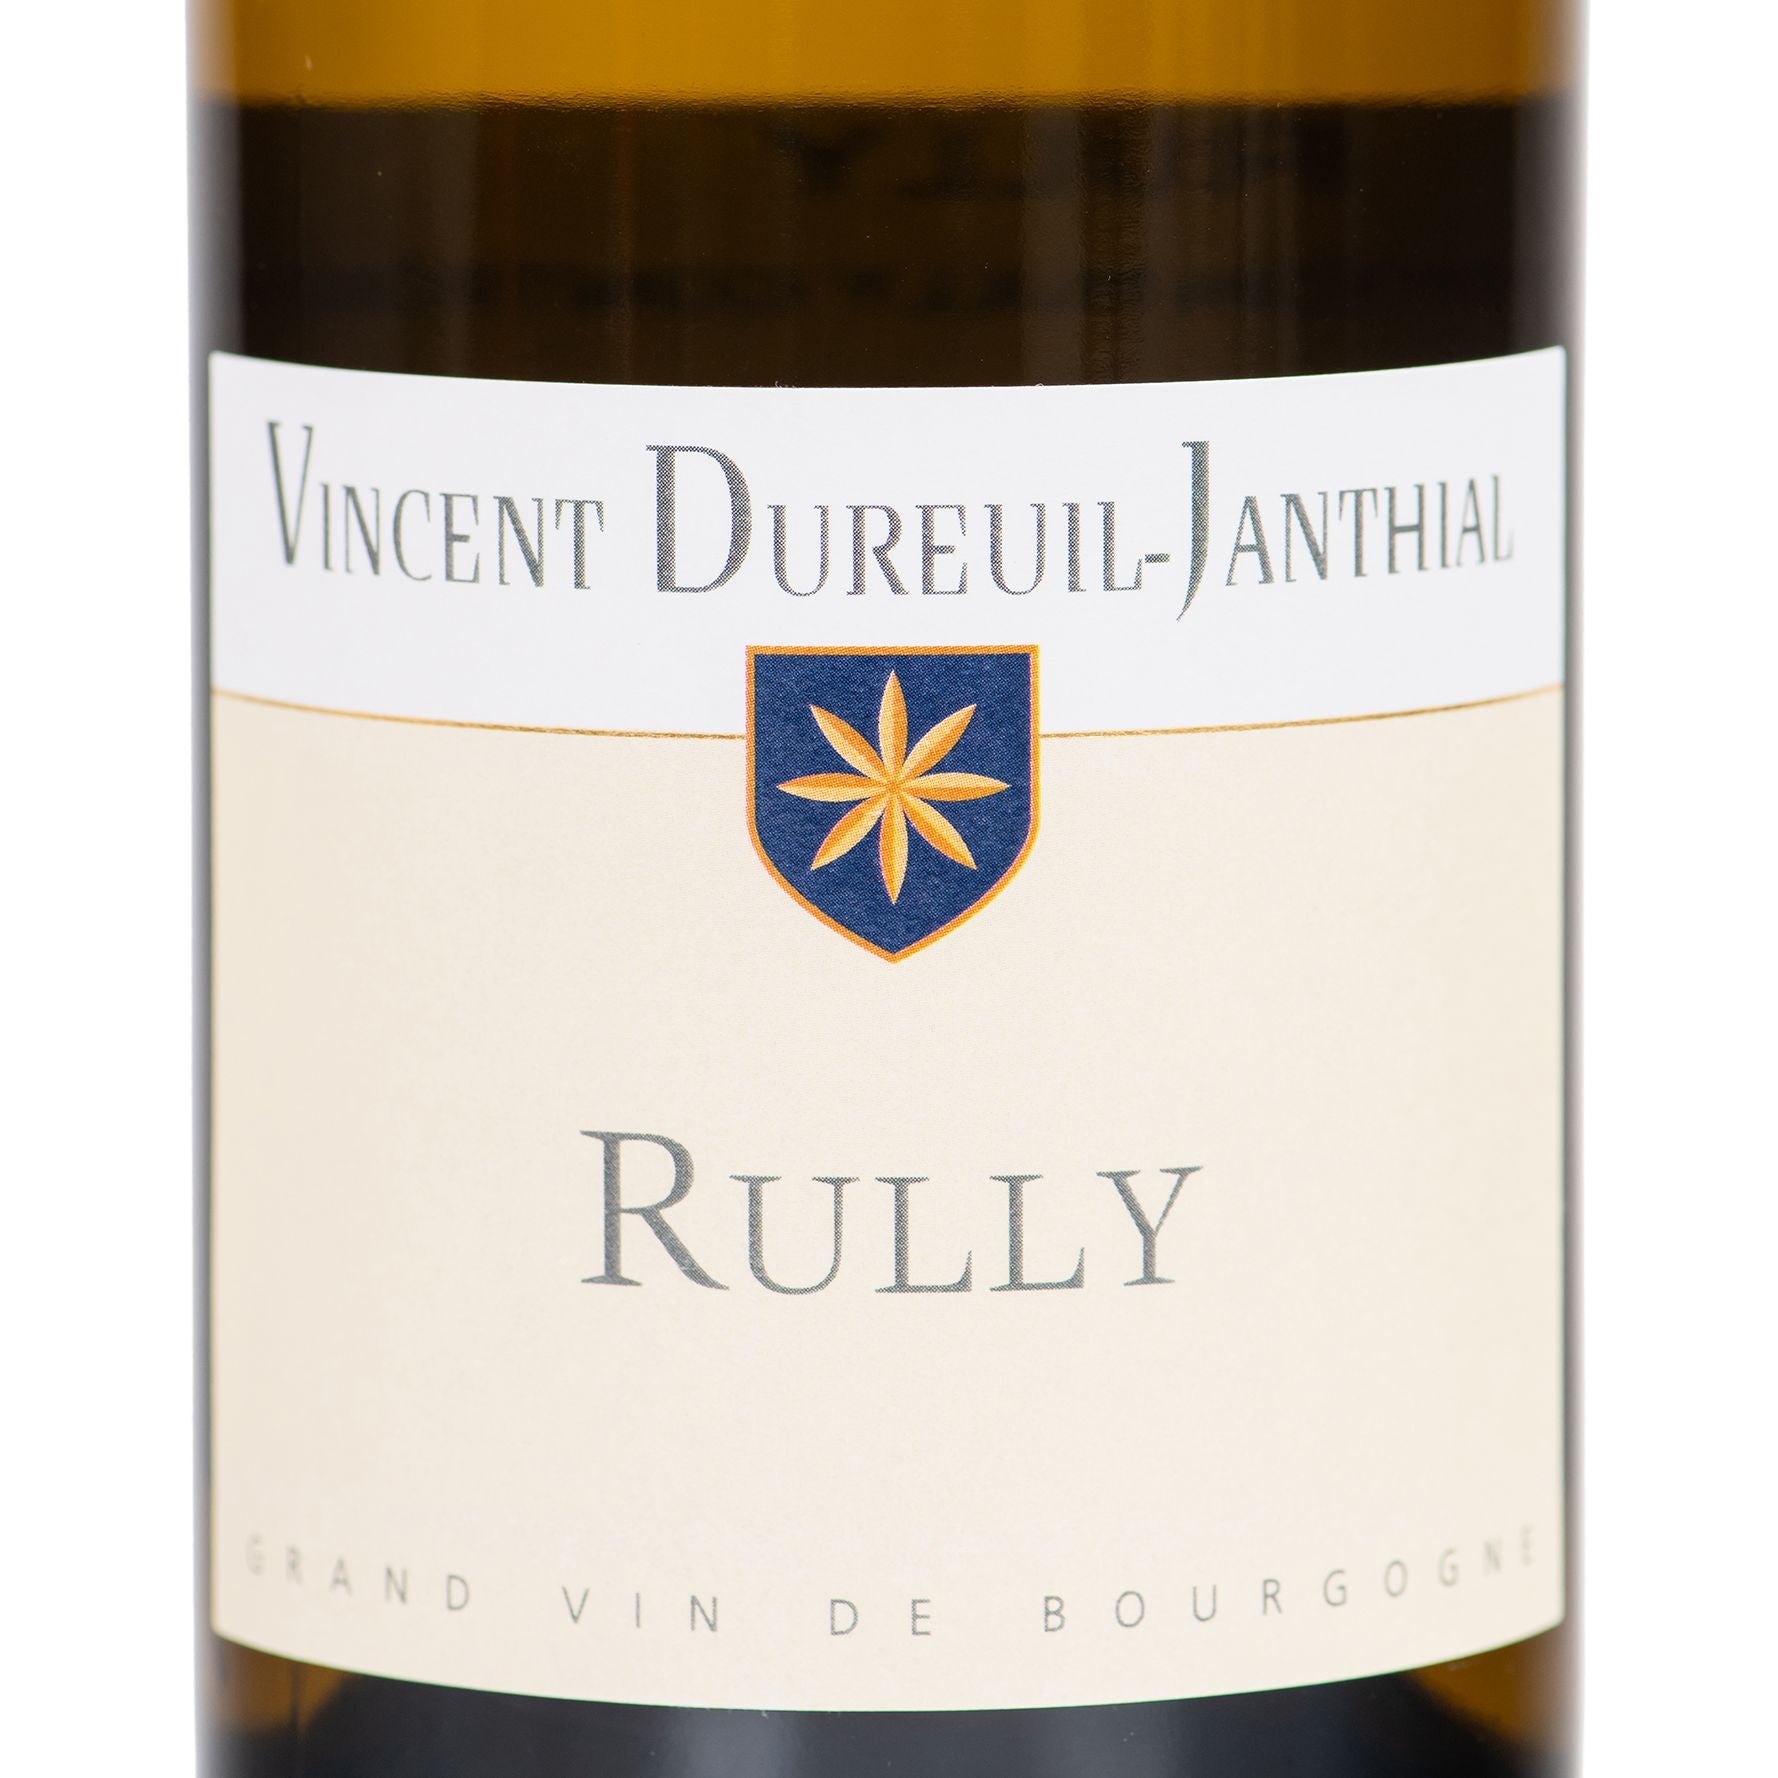 Vincent Dureuil-Janthial, Chardonnay, Rully